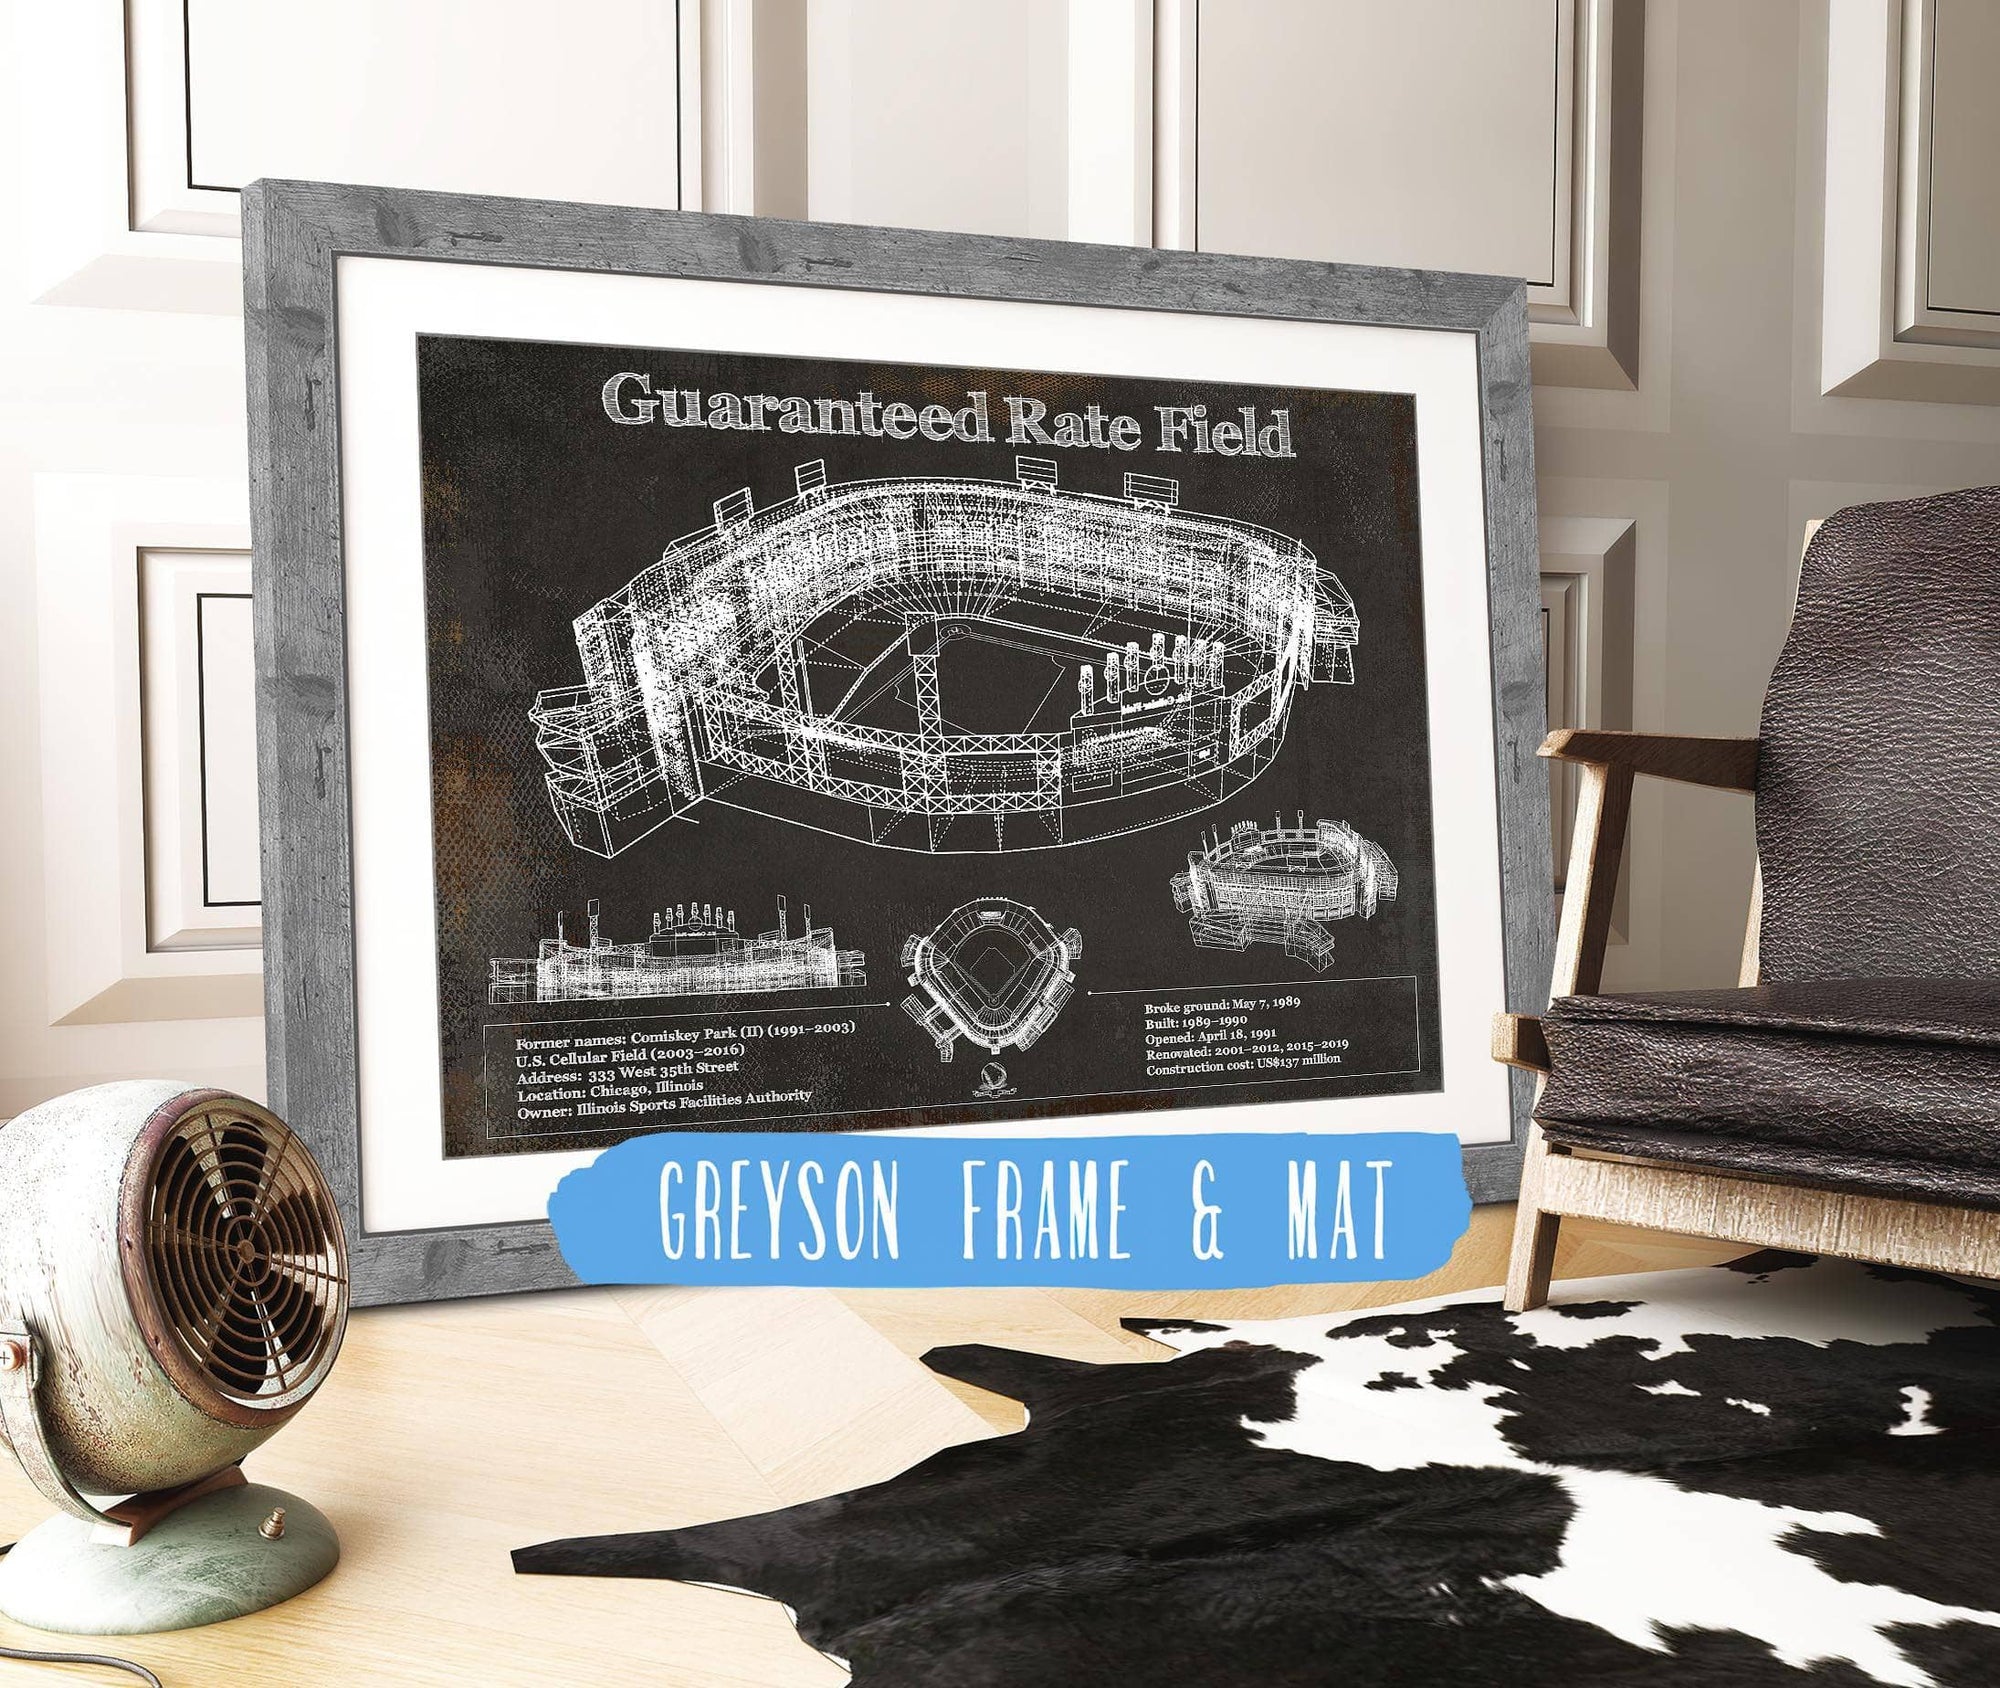 Cutler West Baseball Collection 14" x 11" / Greyson Frame & Mat Guaranteed Rate Field - Chicago White Sox Team Color Vintage Baseball Fan Print 933311127_22164